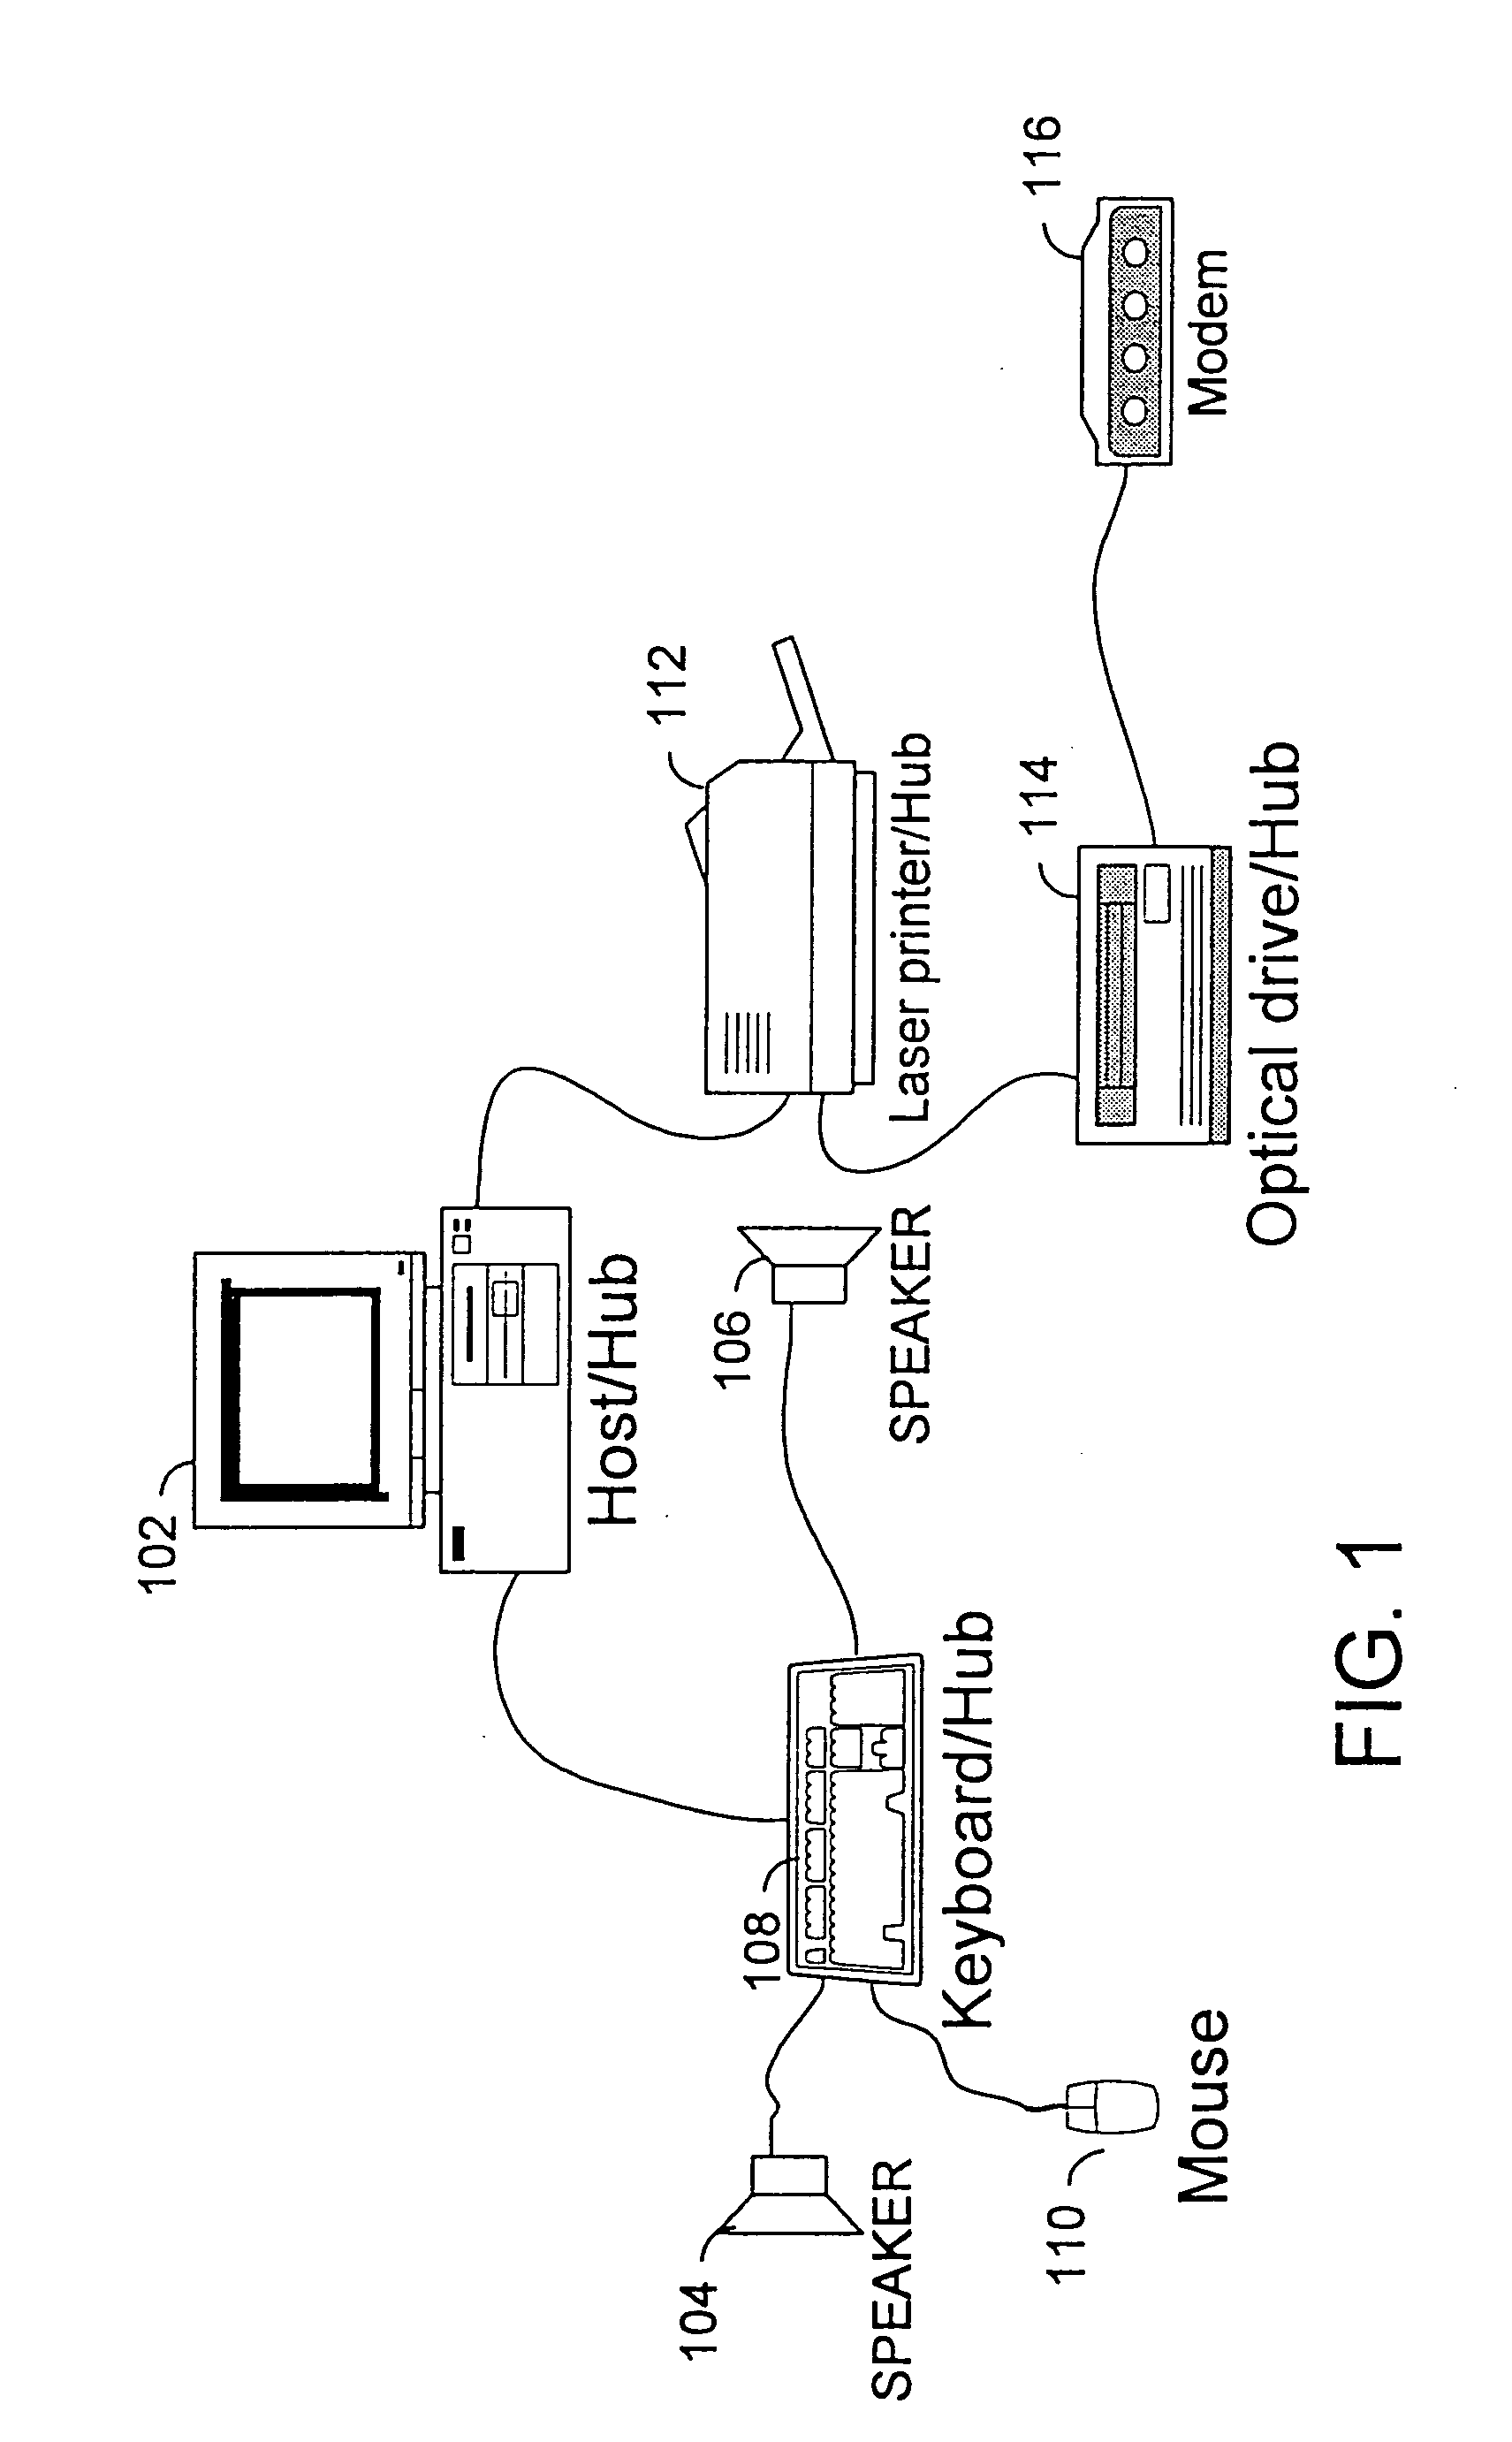 Method for guaranteeing a device minimum bandwidth on a USB bus